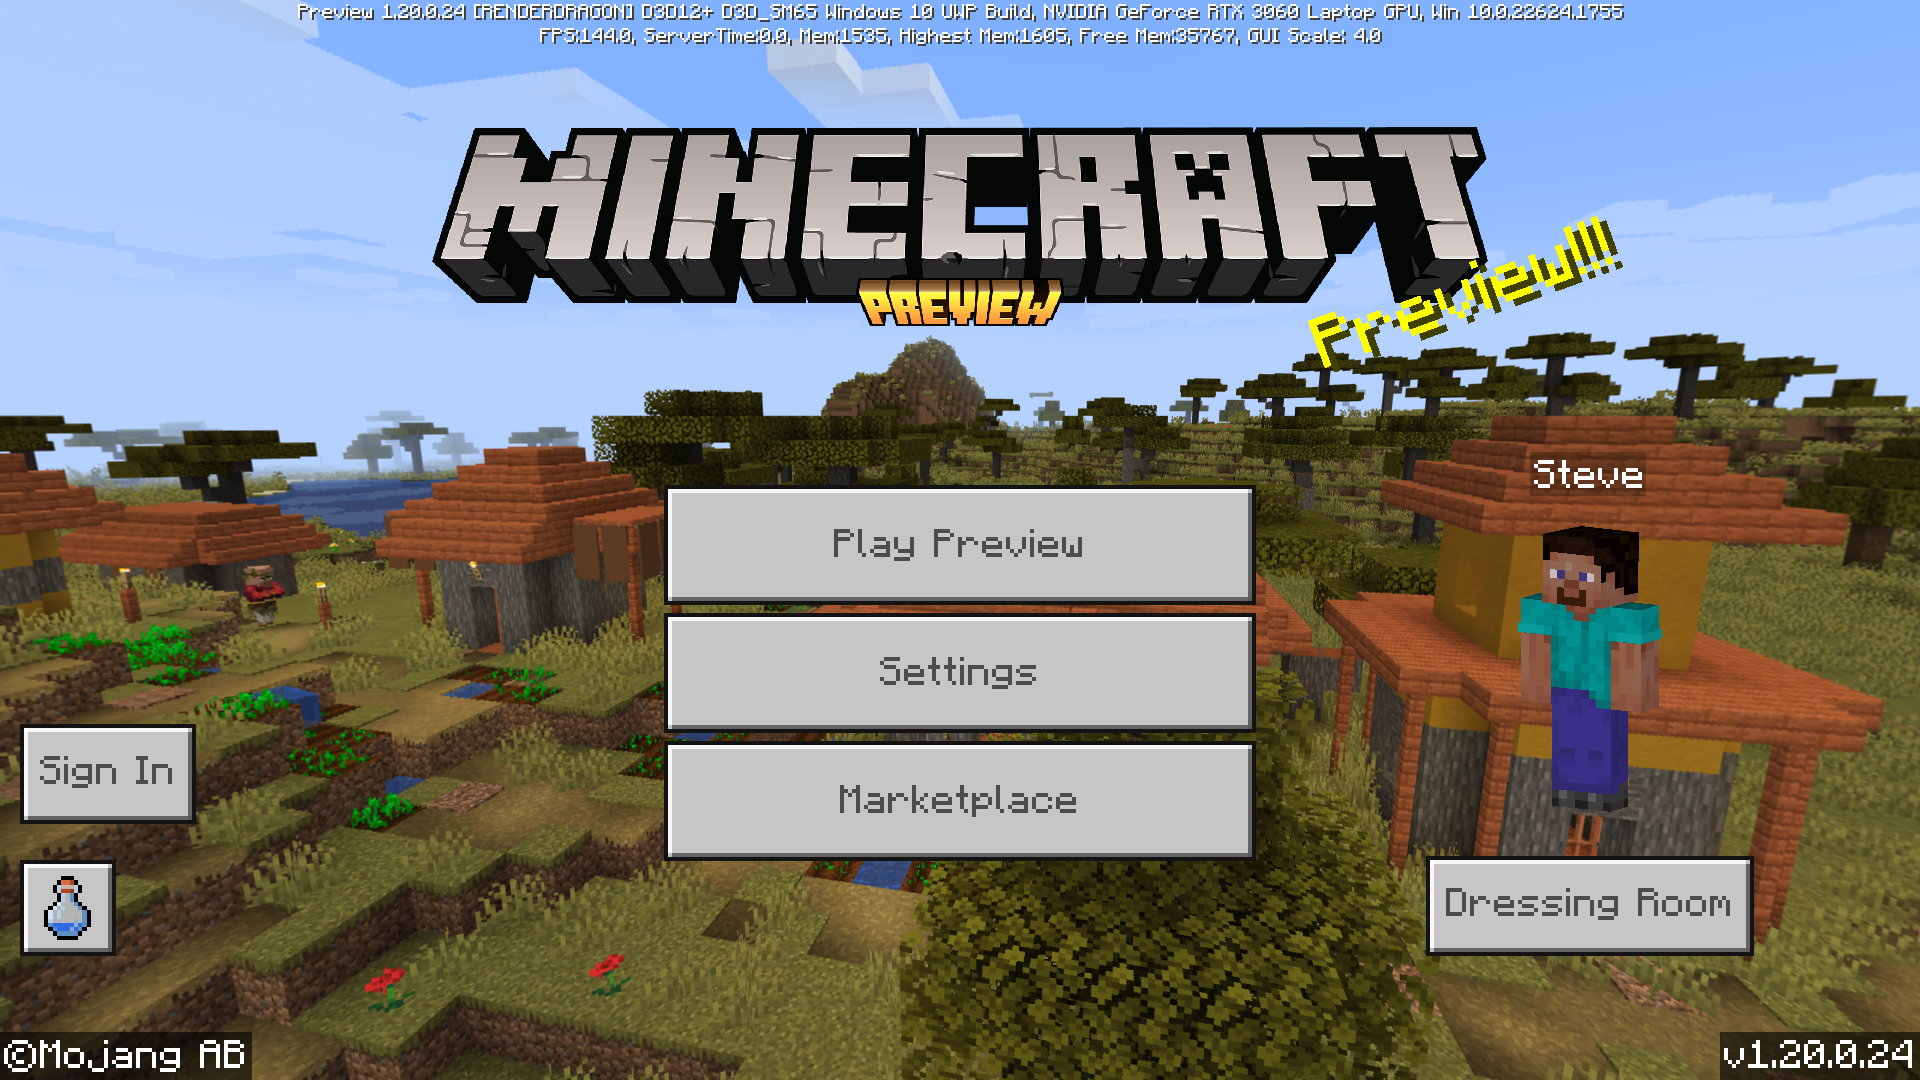 How to download Minecraft Bedrock beta/preview 1.20.0.24